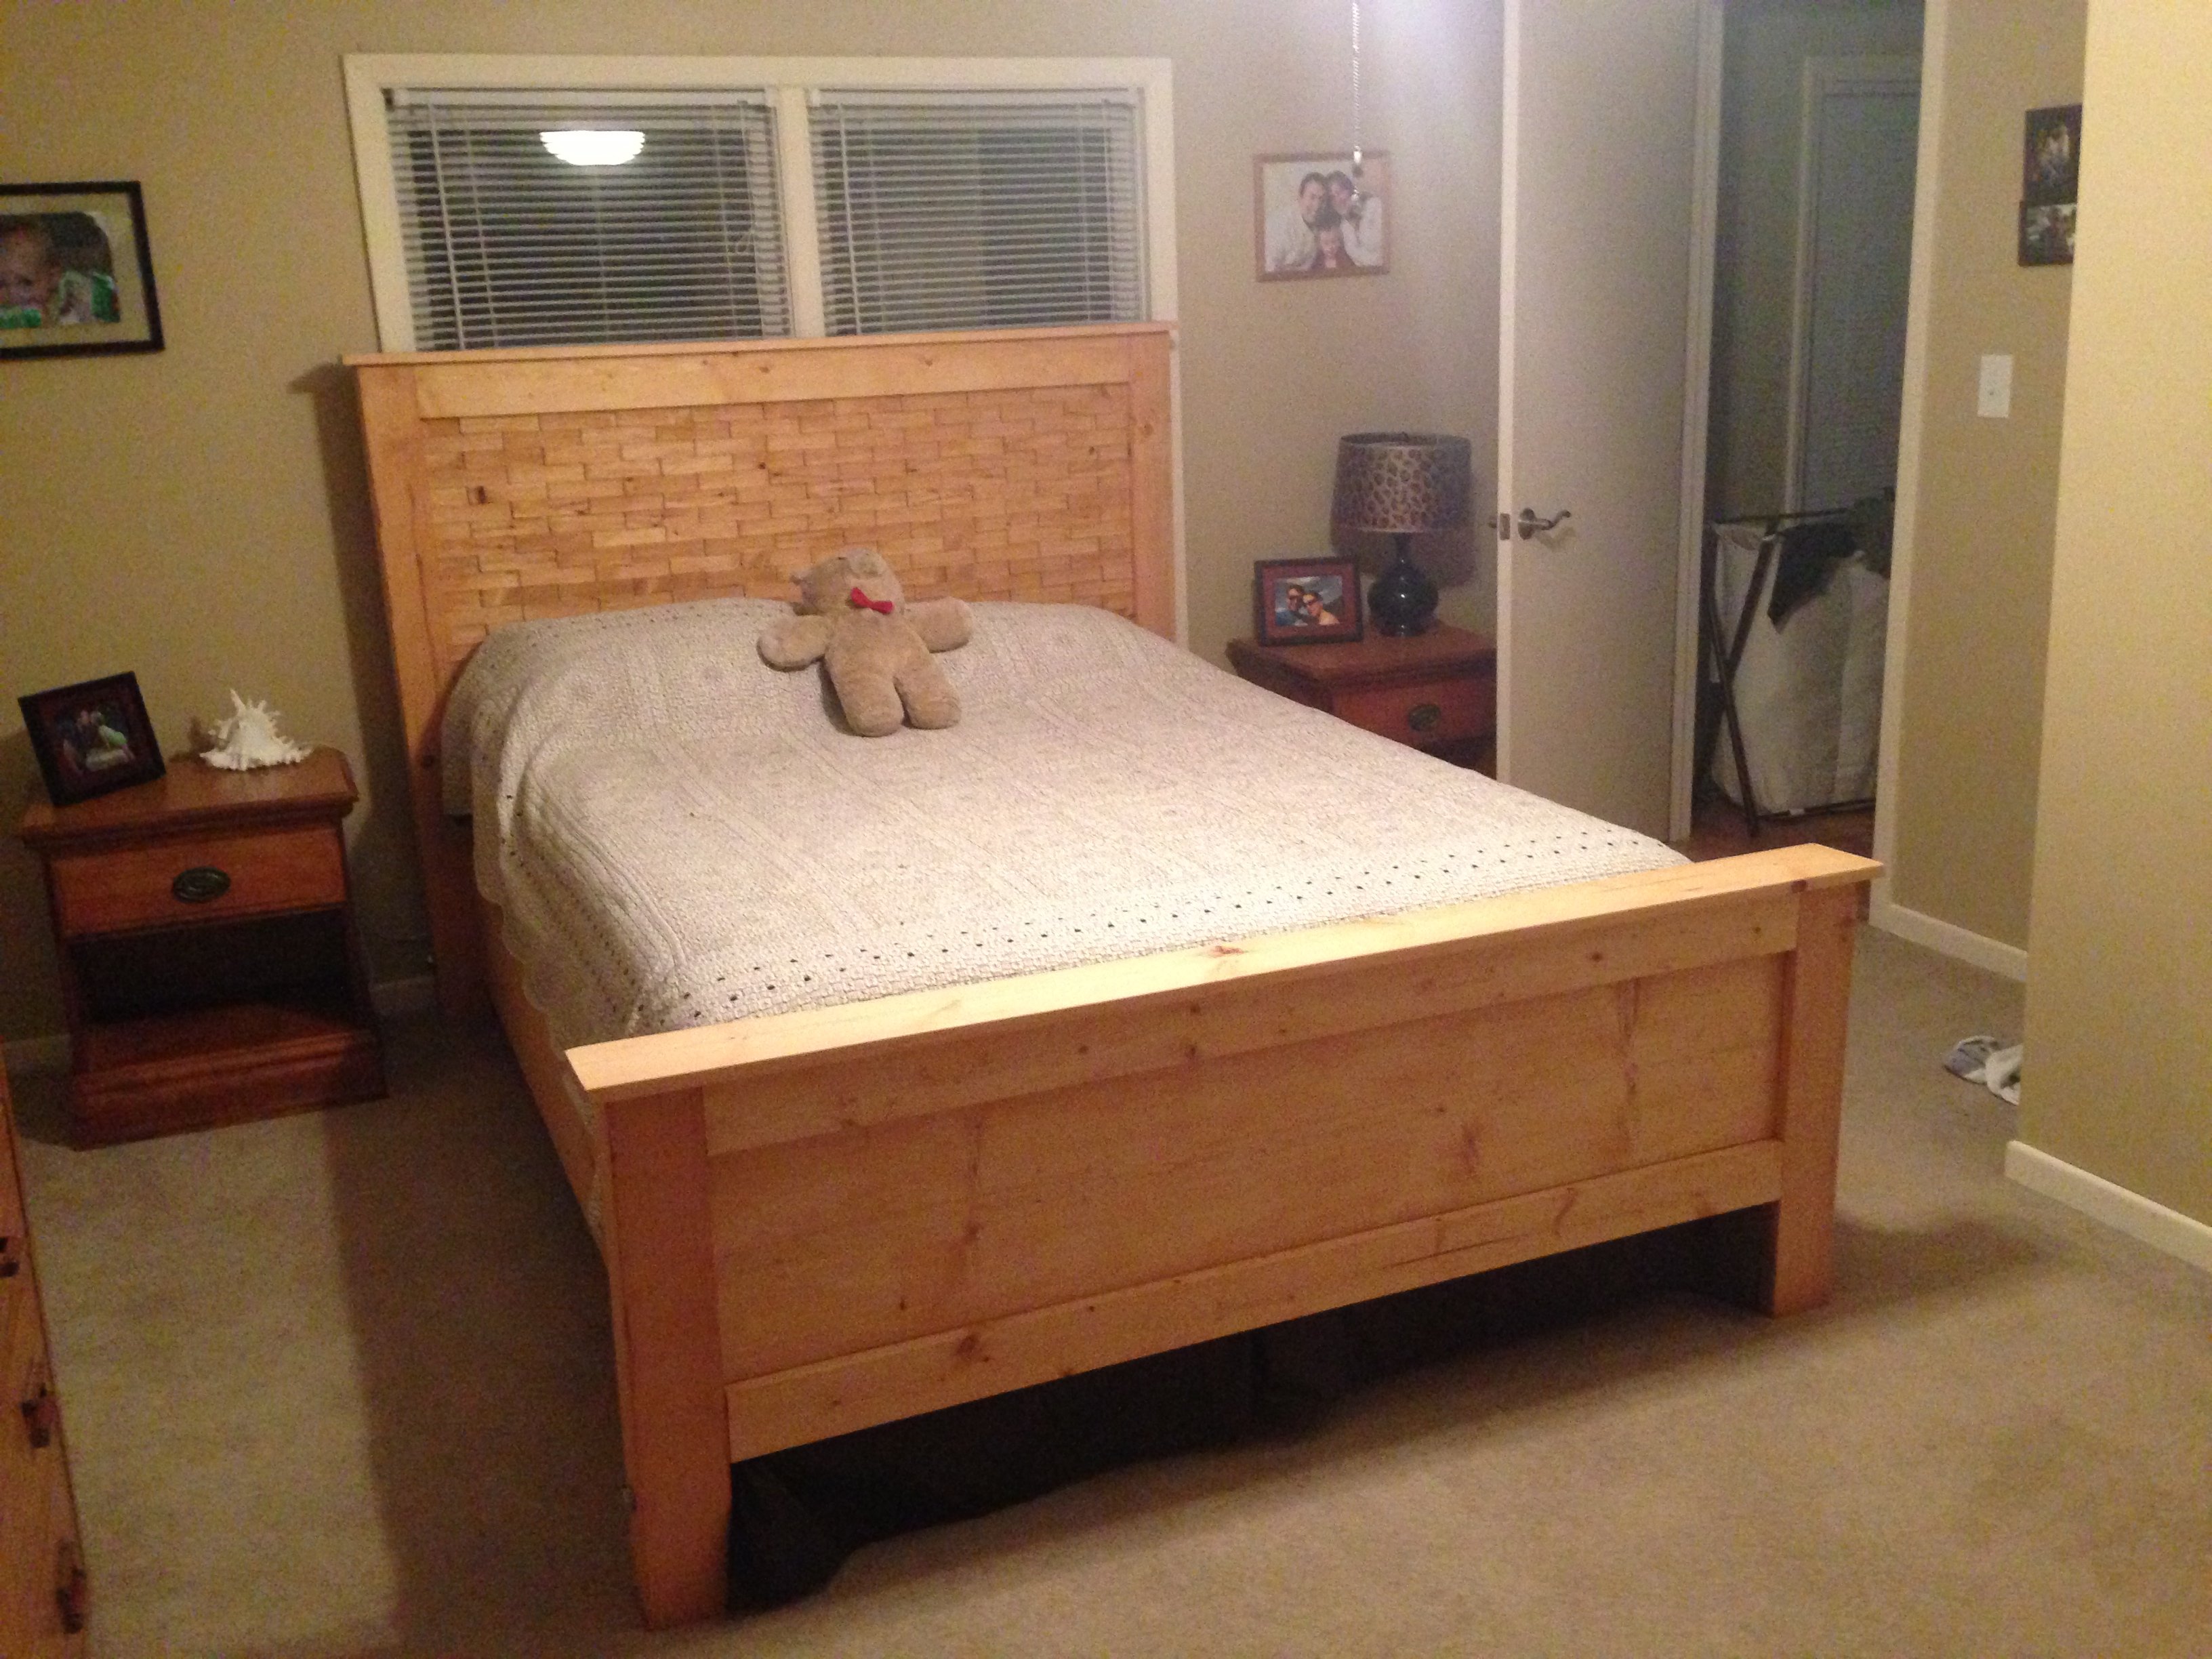 DIY Wood Shim bed plans - Queen | Do It Yourself Home Projects from ...